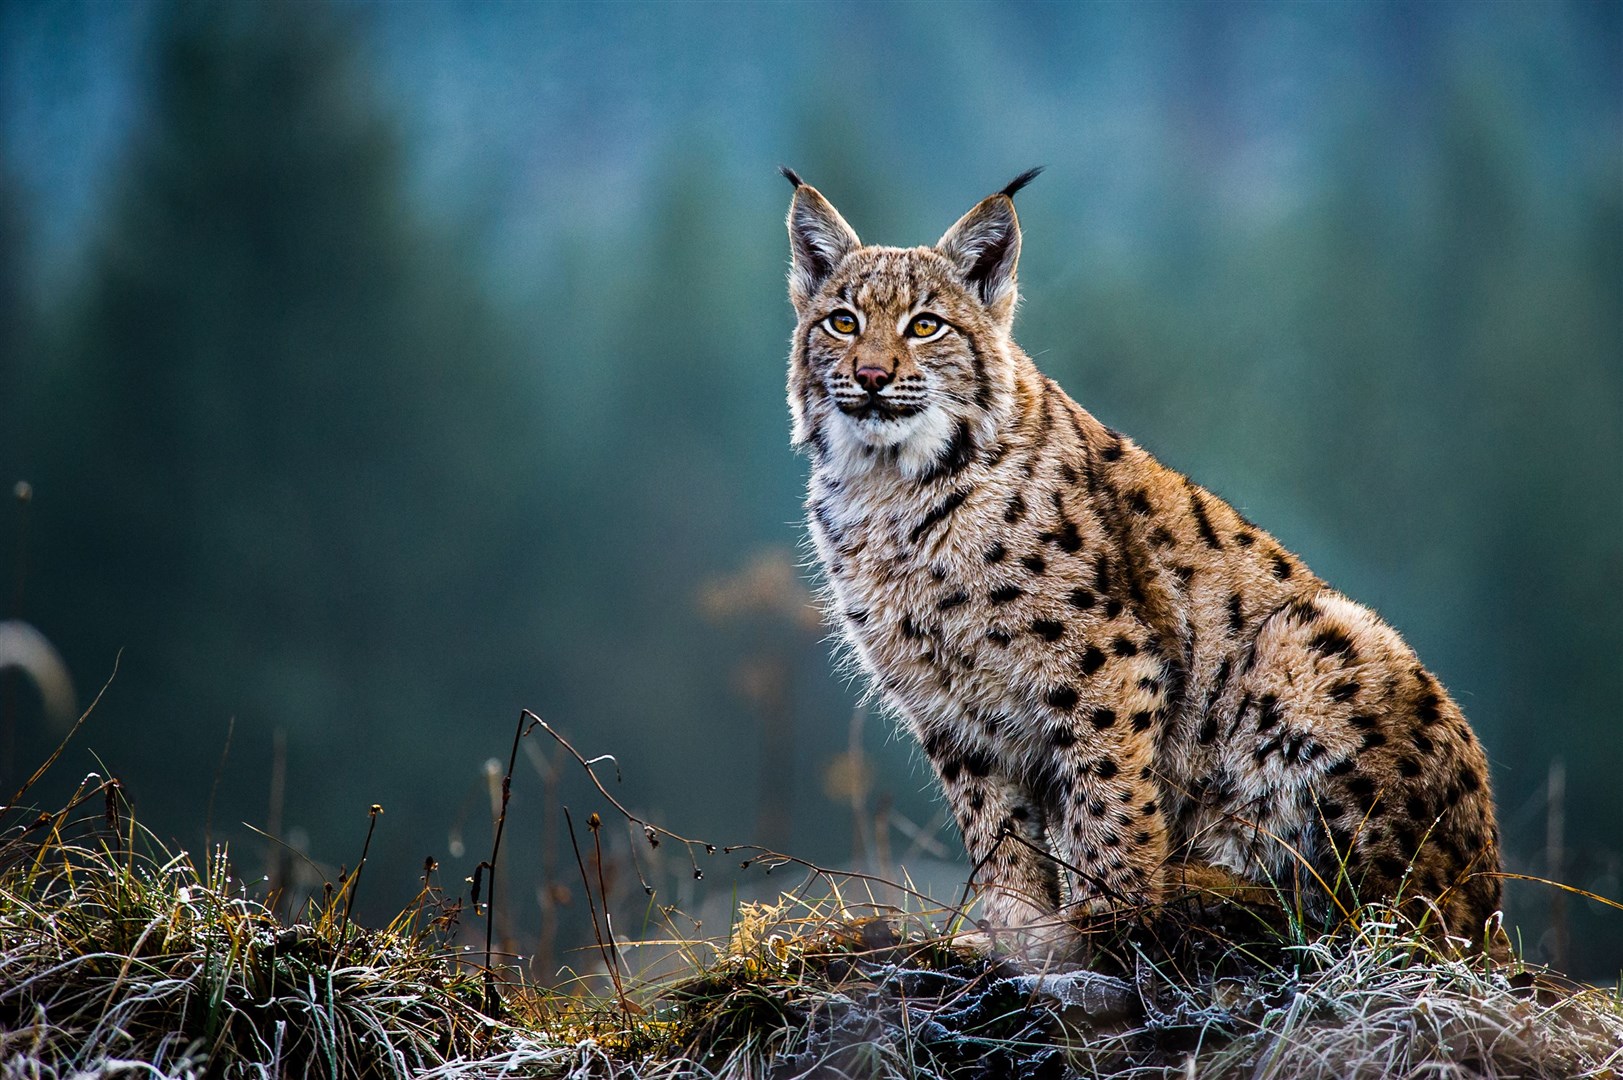 The debate has been running for several years now on the reintroduction of the Eurasian lynx to Scotland.